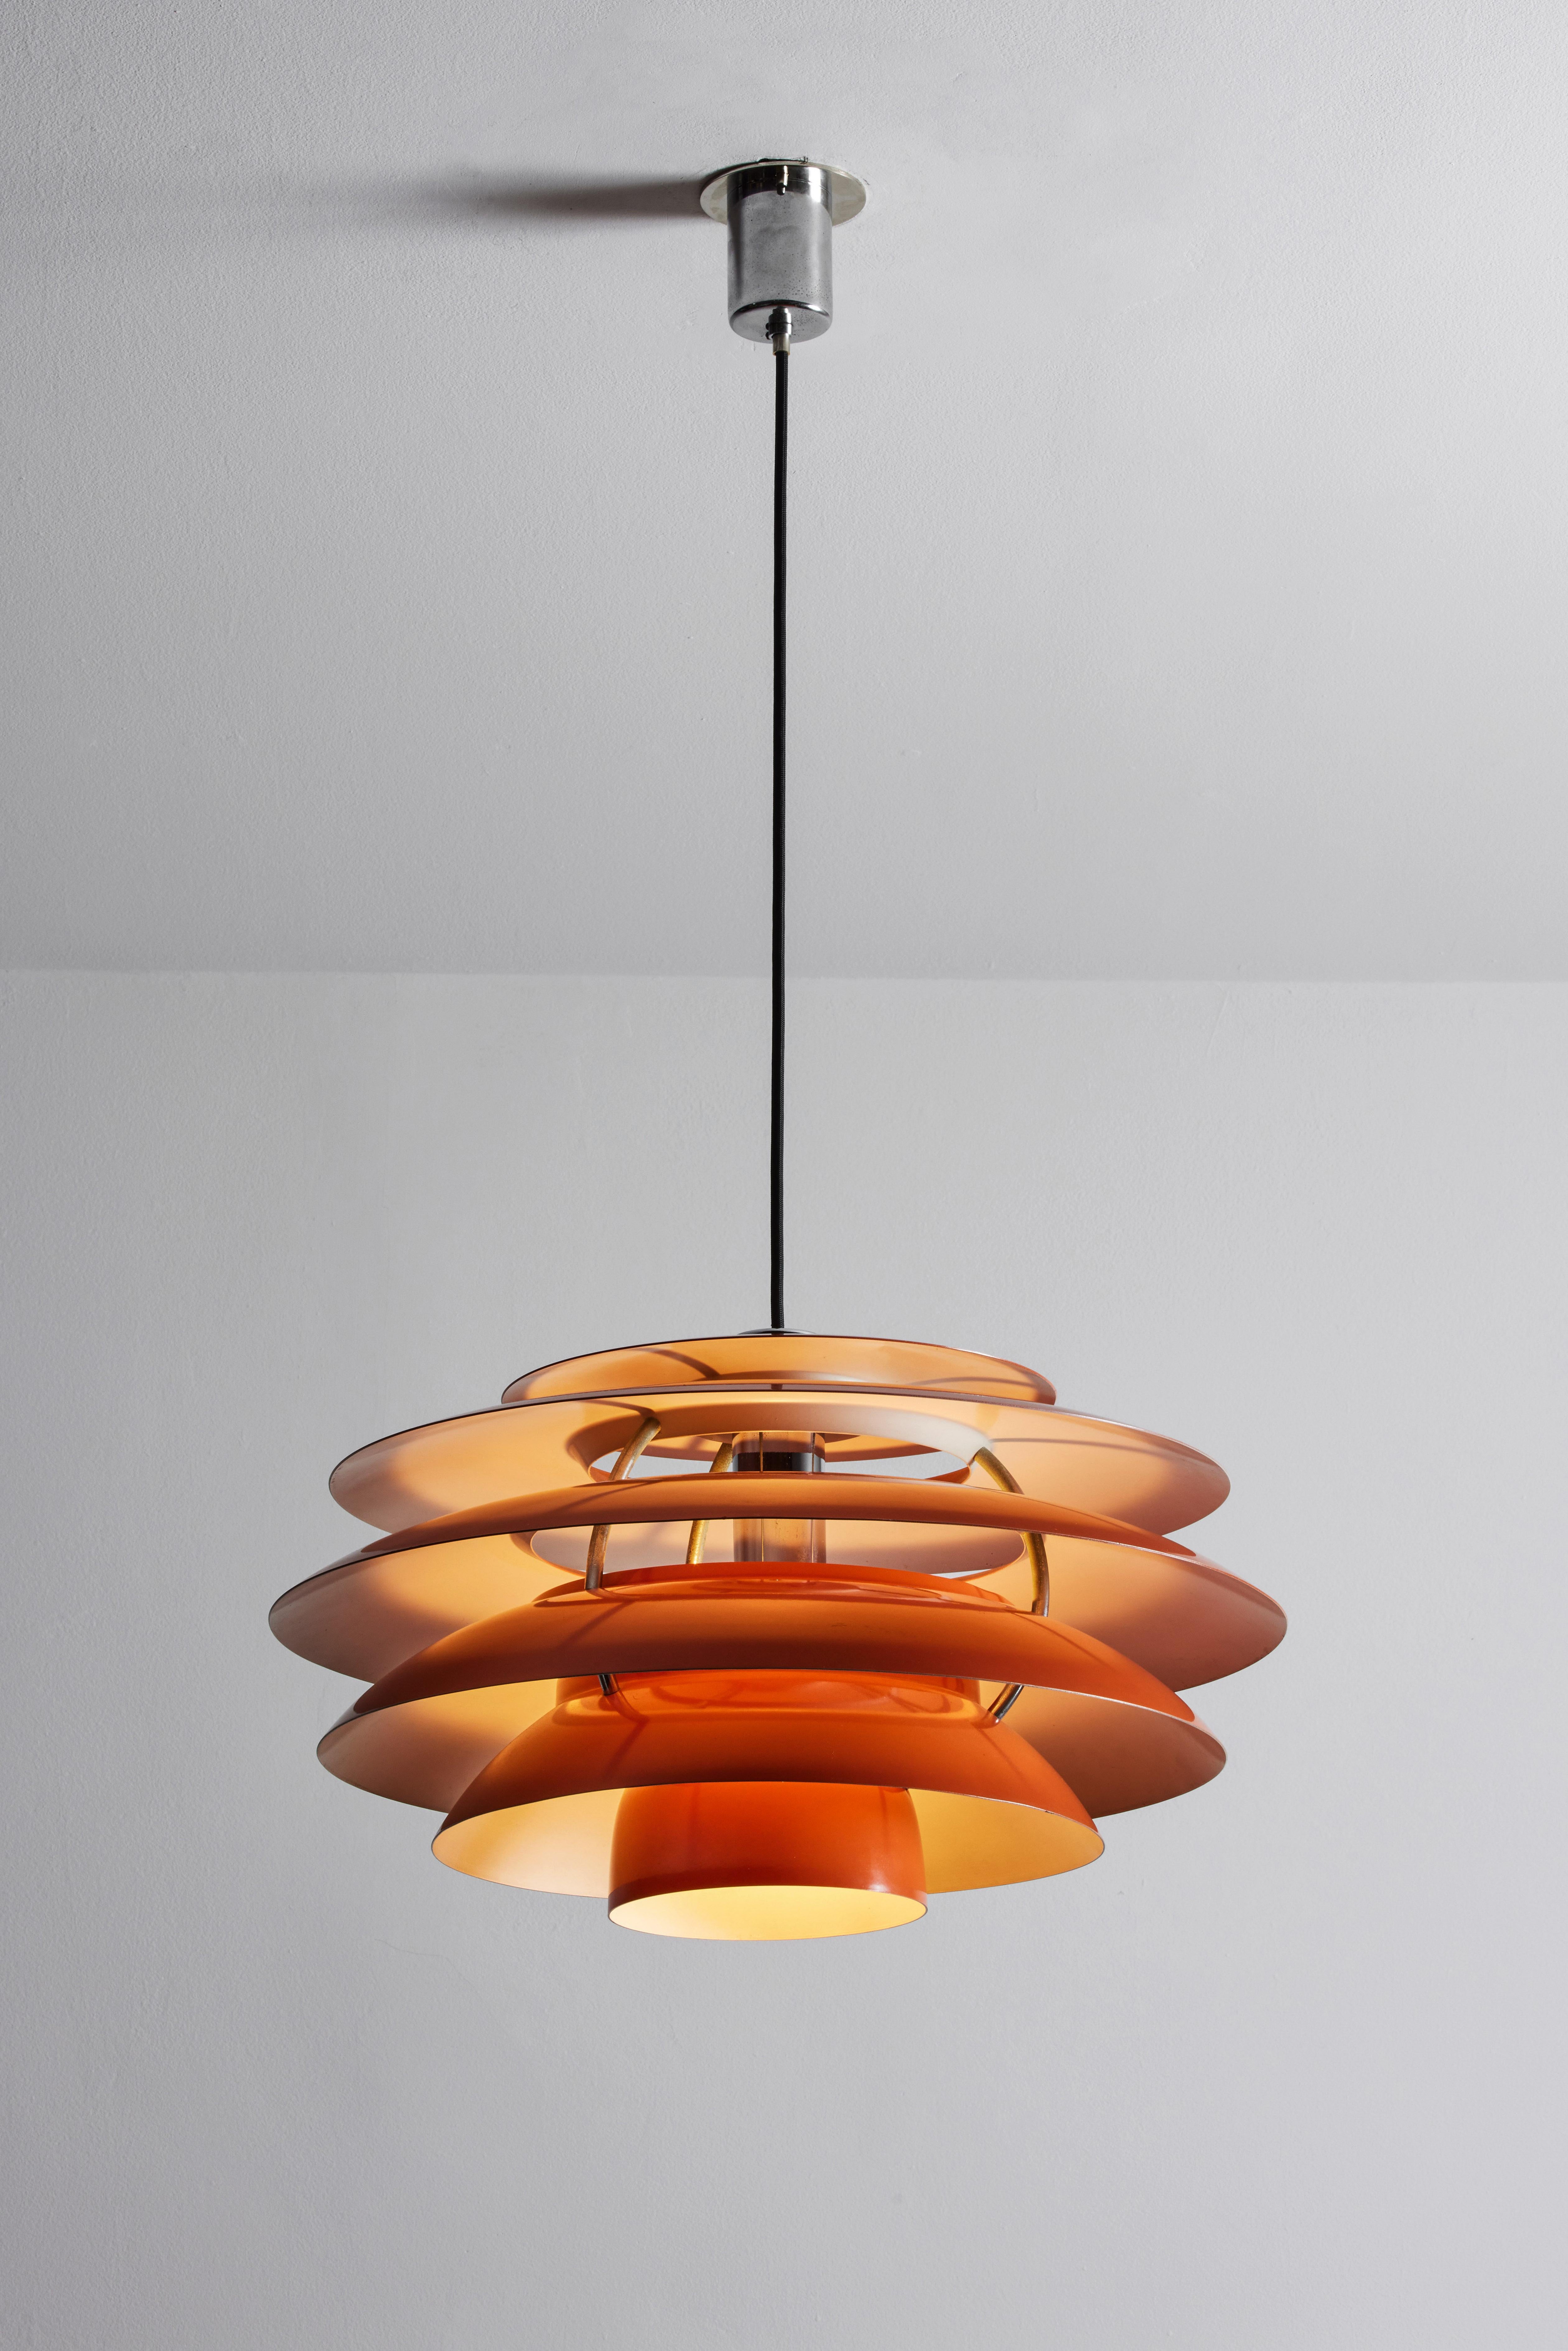 One suspension light by Stilnovo. Manufactured in Italy, circa 1960s. Enameled aluminum, chrome hardware. Rewired for U.S. junction boxes. Custom ceiling plates. We recommend one E26 75w maximum bulb per socket. Bulbs provided as a one time